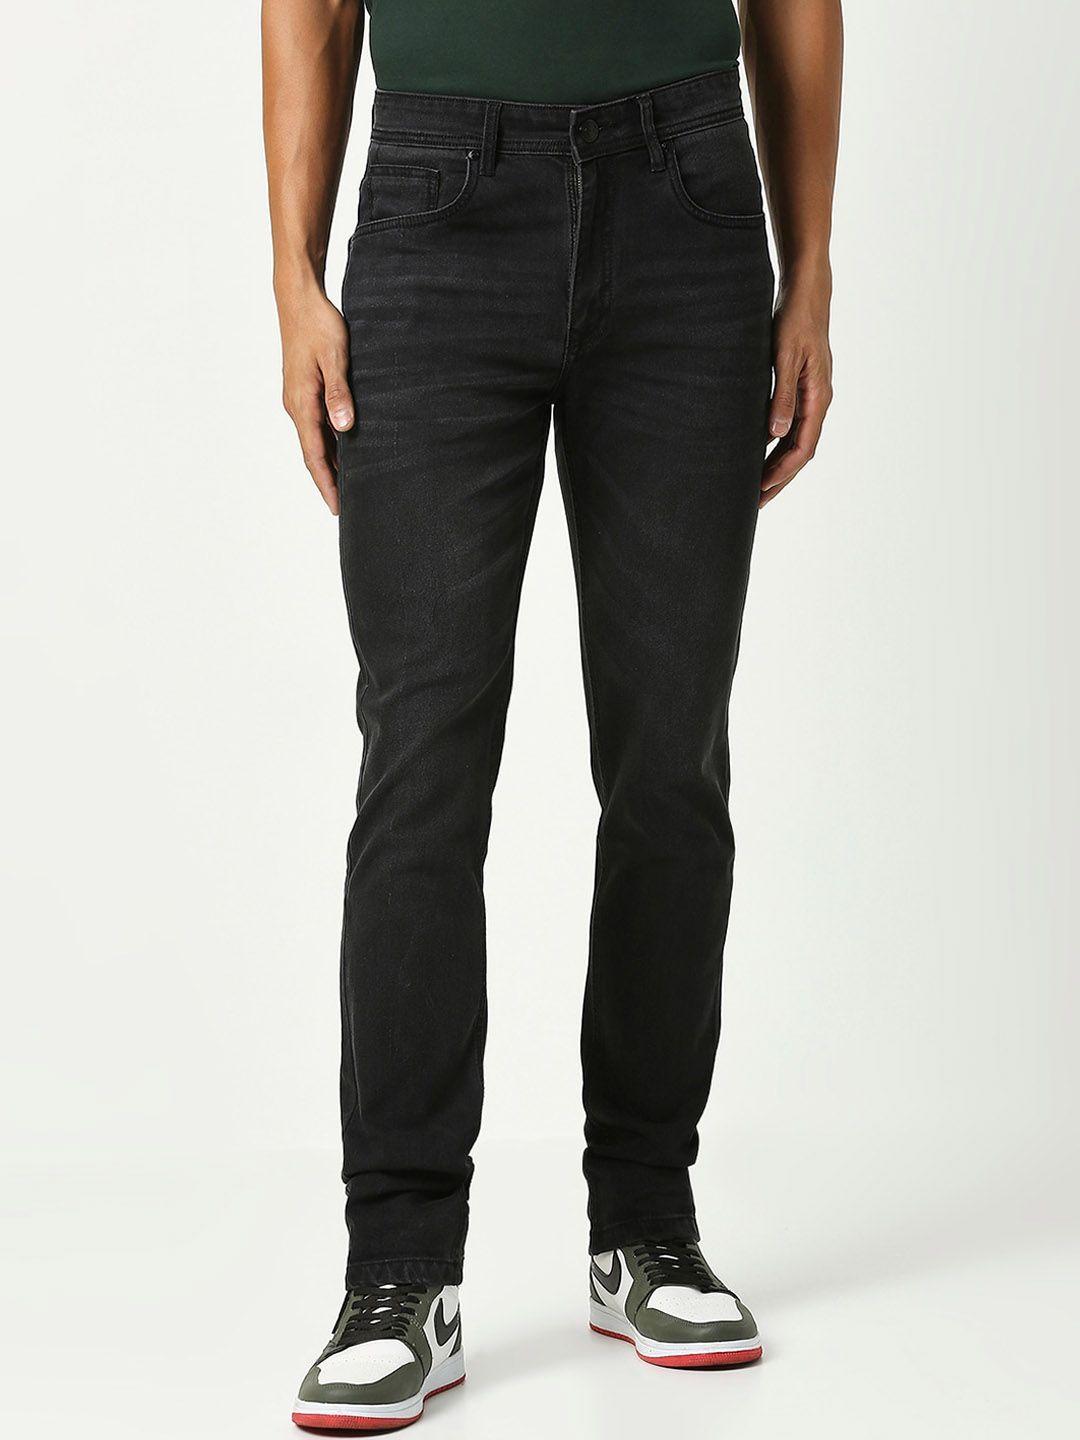 hj-hasasi-men-relaxed-fit-high-rise-clean-look-acid-wash-stretchable-jeans